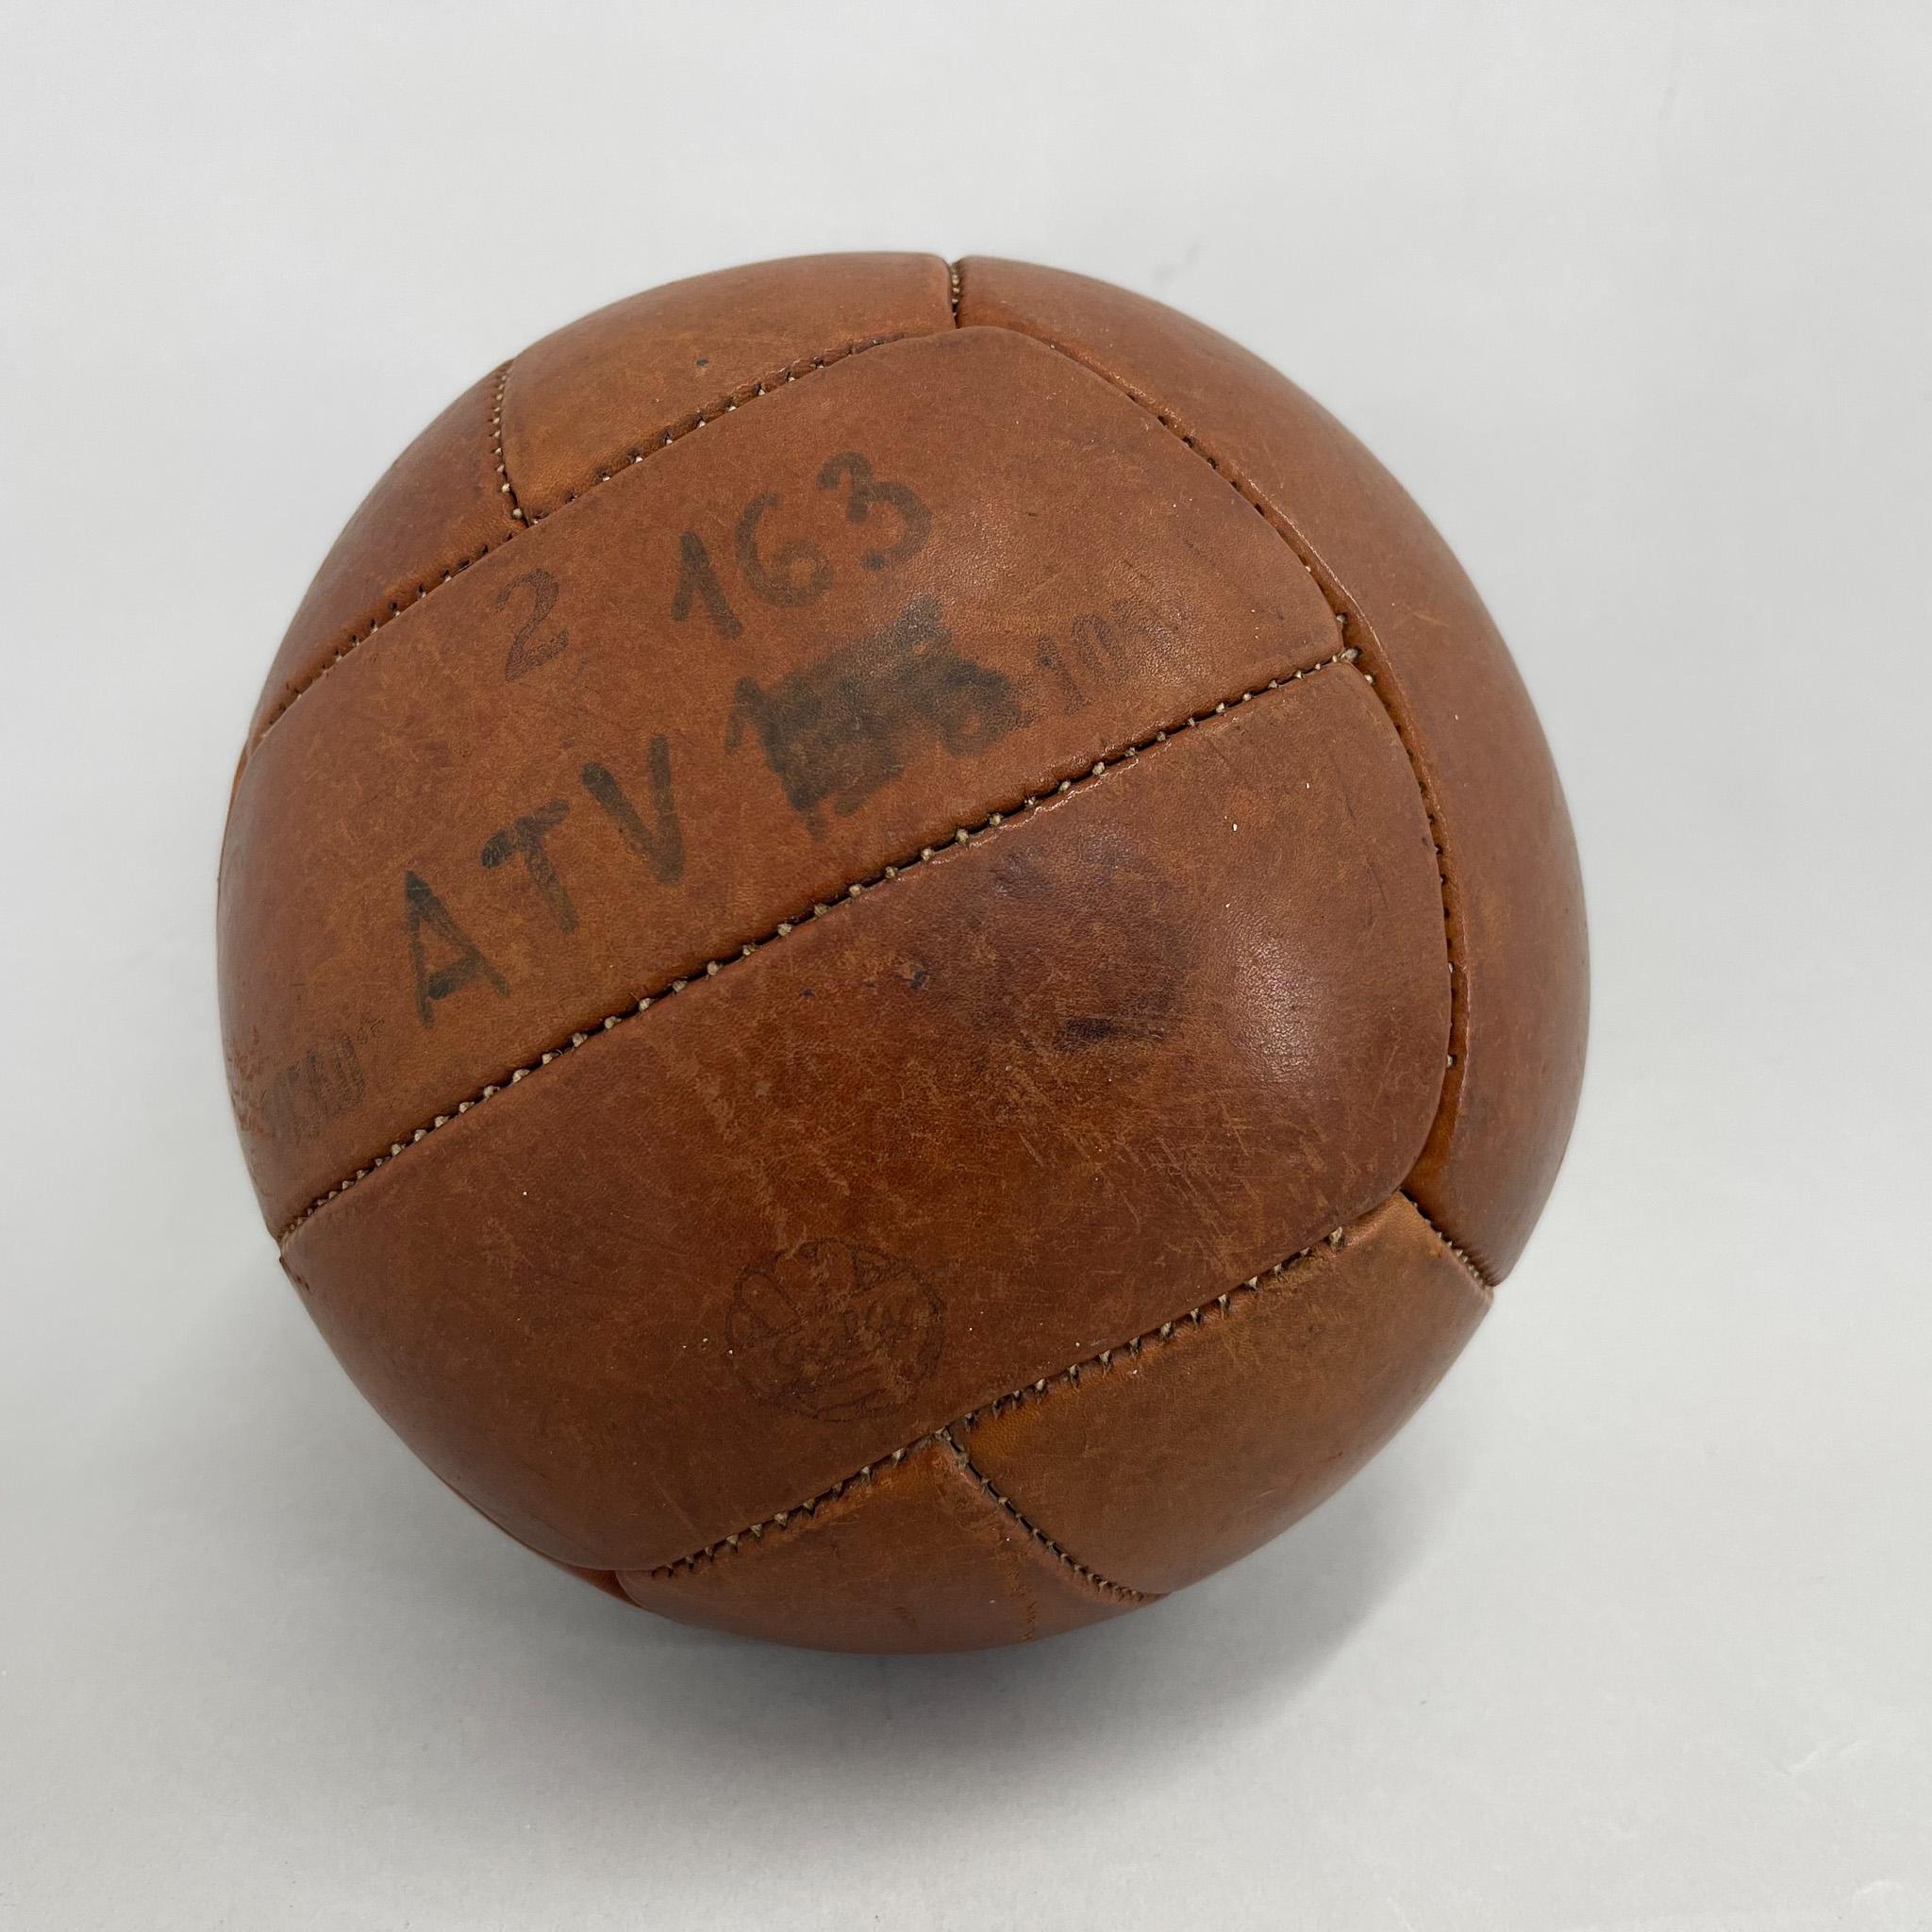 Original vintage heavy leather training ball with beautiful patina. The ball is made of handstitched genuine leather in former Czechoslovakia by Gala coompany in the 1930s. It can be used as an original interior accessory or as a stylish training